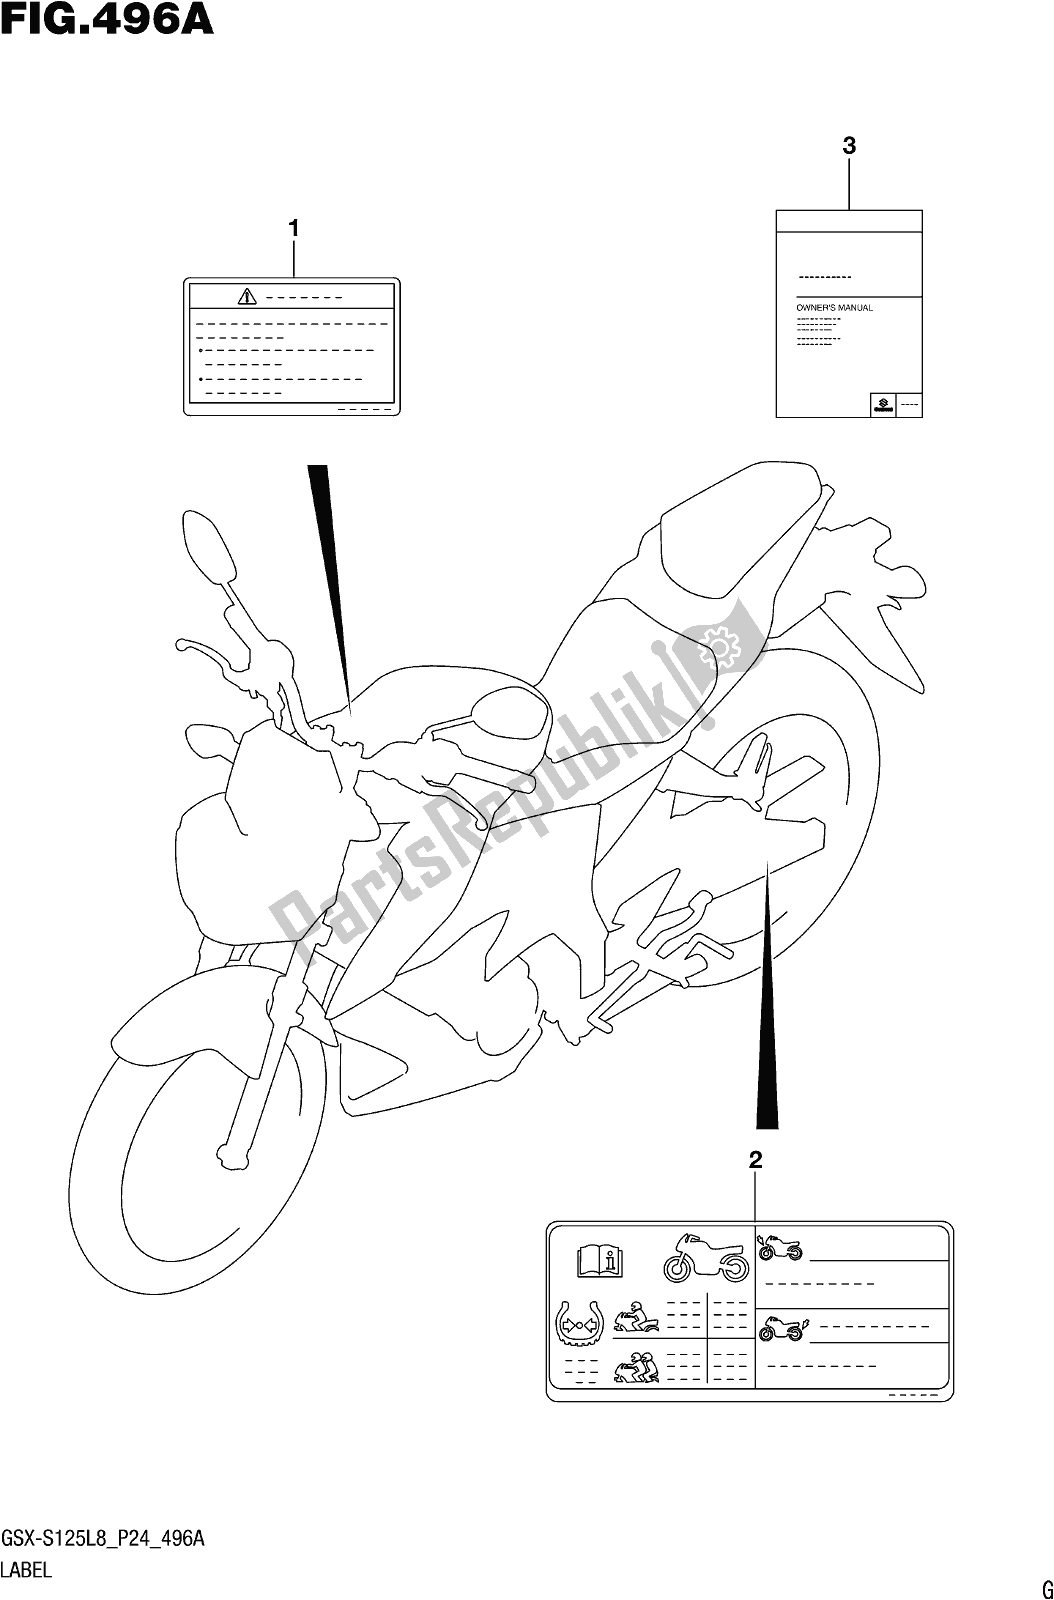 All parts for the Fig. 496a Label of the Suzuki Gsx-s 125 MLX 2018